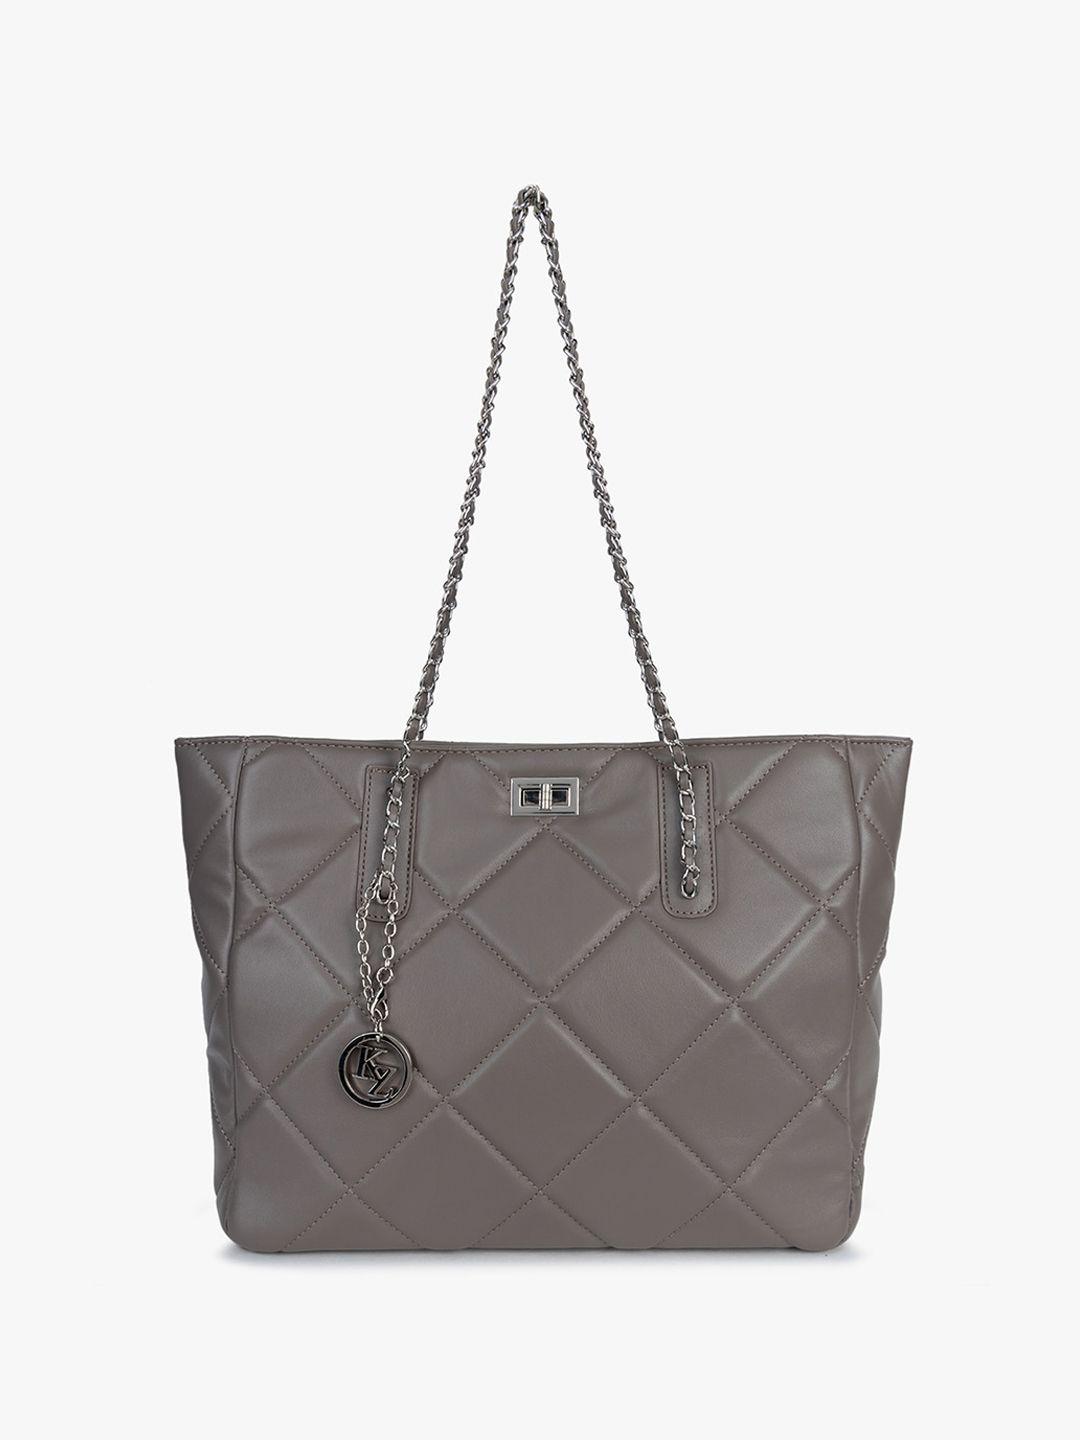 kazo grey pu structured handheld bag with quilted